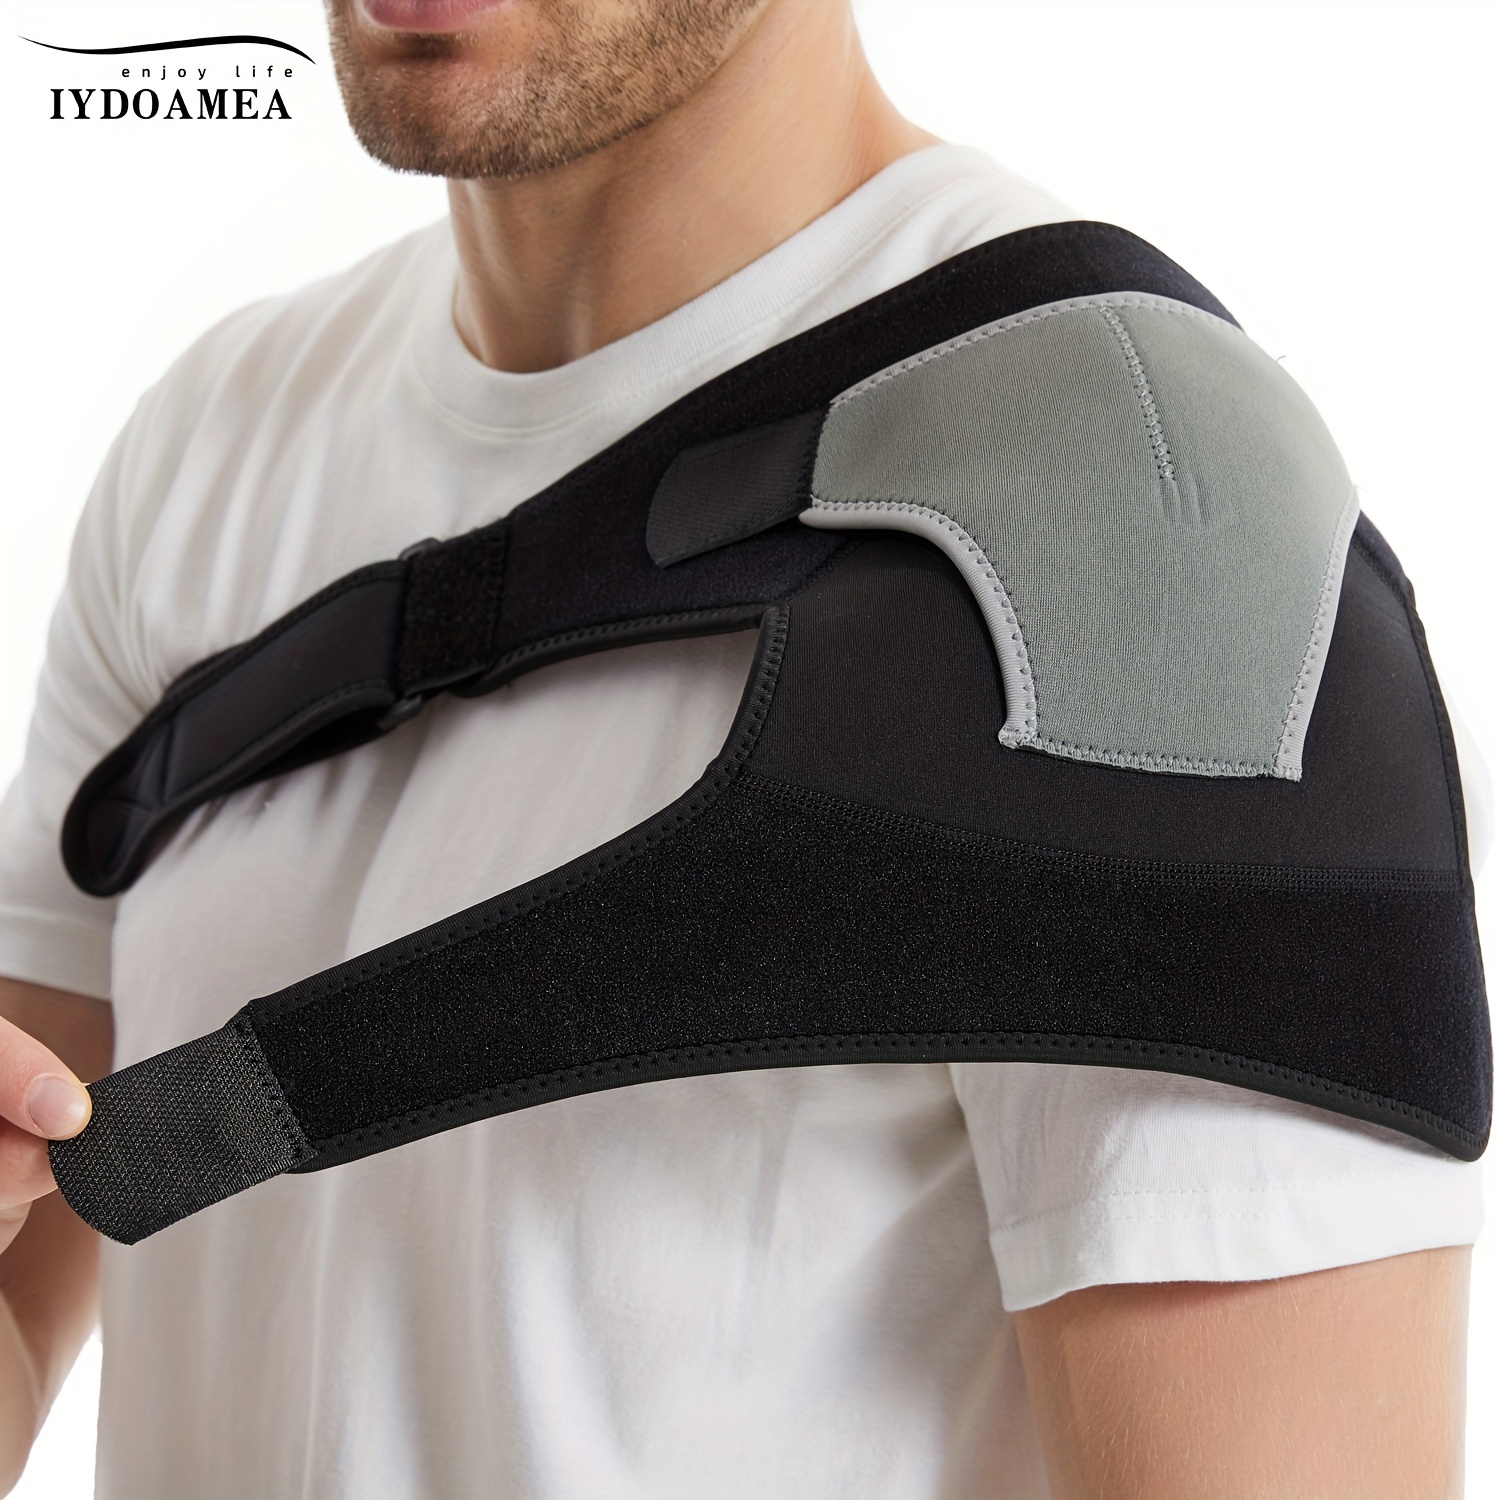 storn Adjustable Shoulder Brace for Rotator Cuff and AC Joint Pain Relief -  Compression Sleeve for Men and Women with Ice Pack Holder